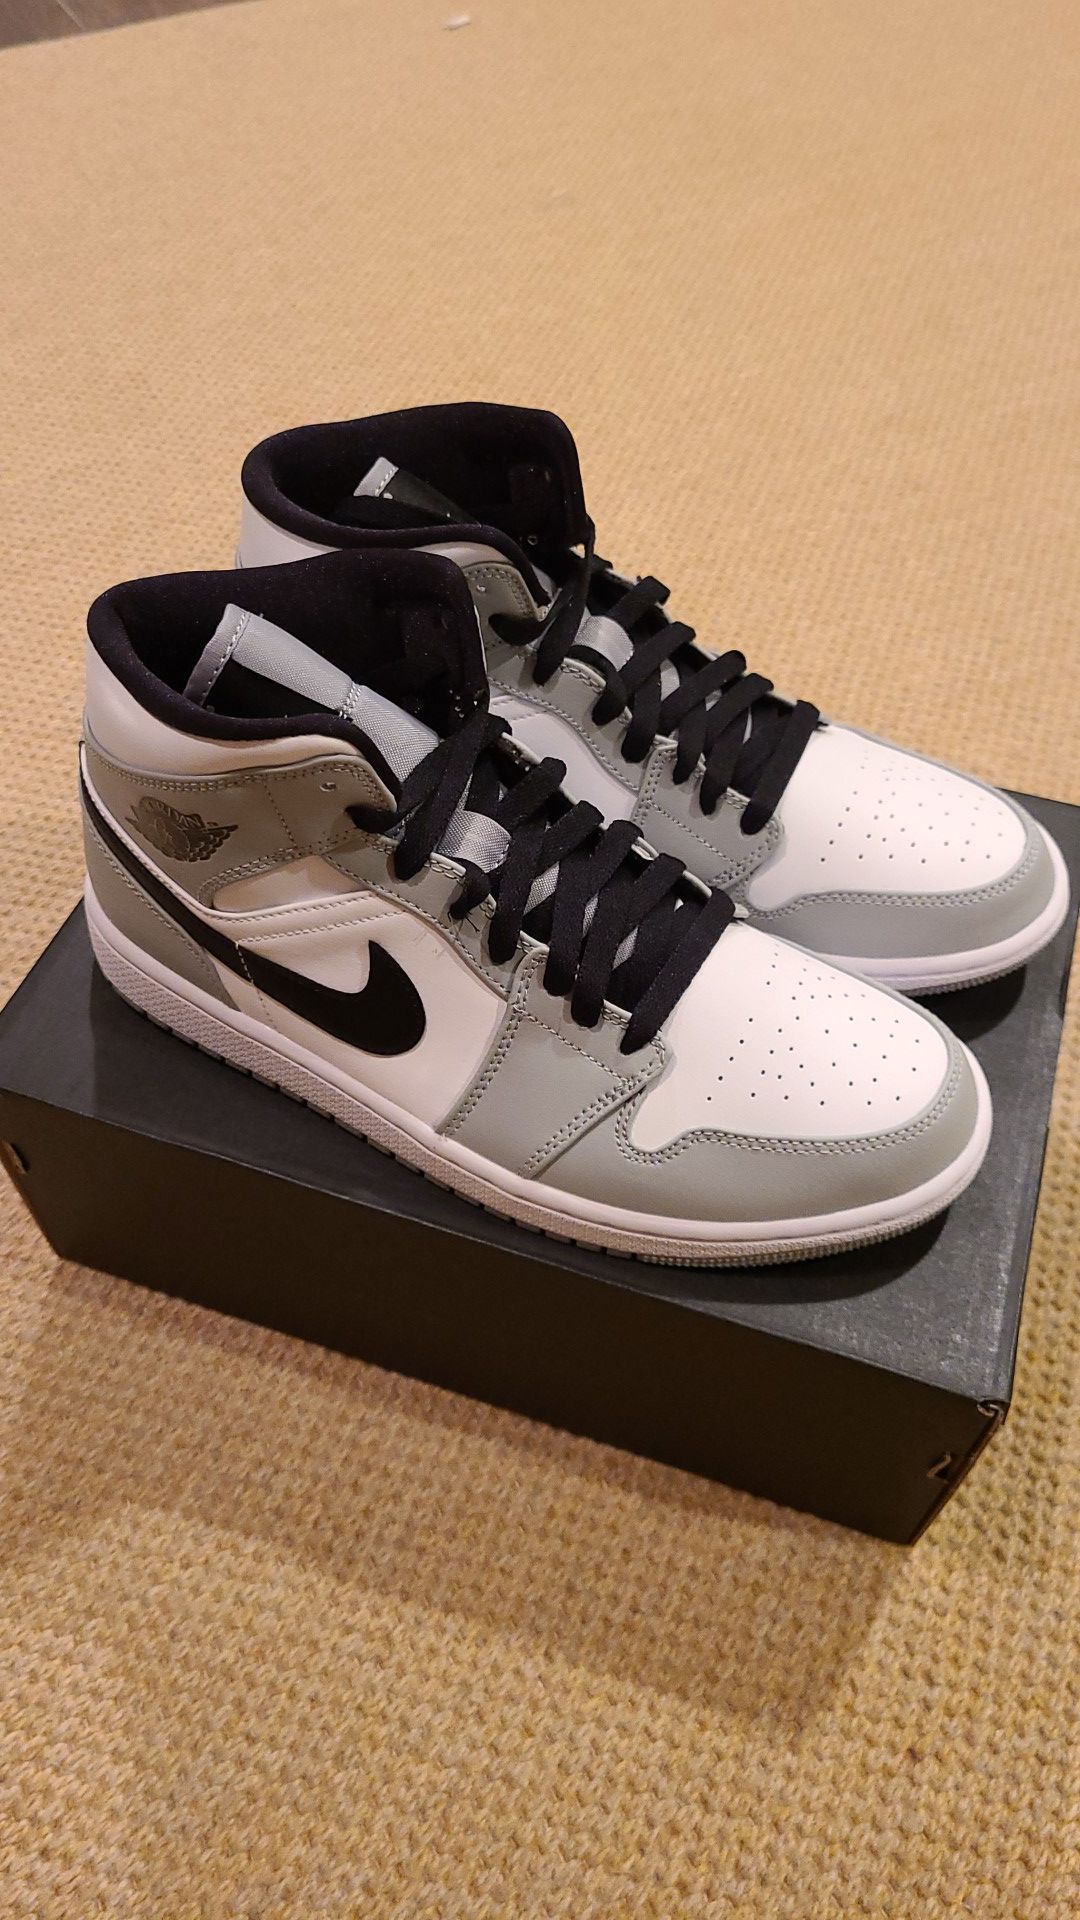 Jordan 1 Mid Smoke Grey size 8.0 and size 8.5 available